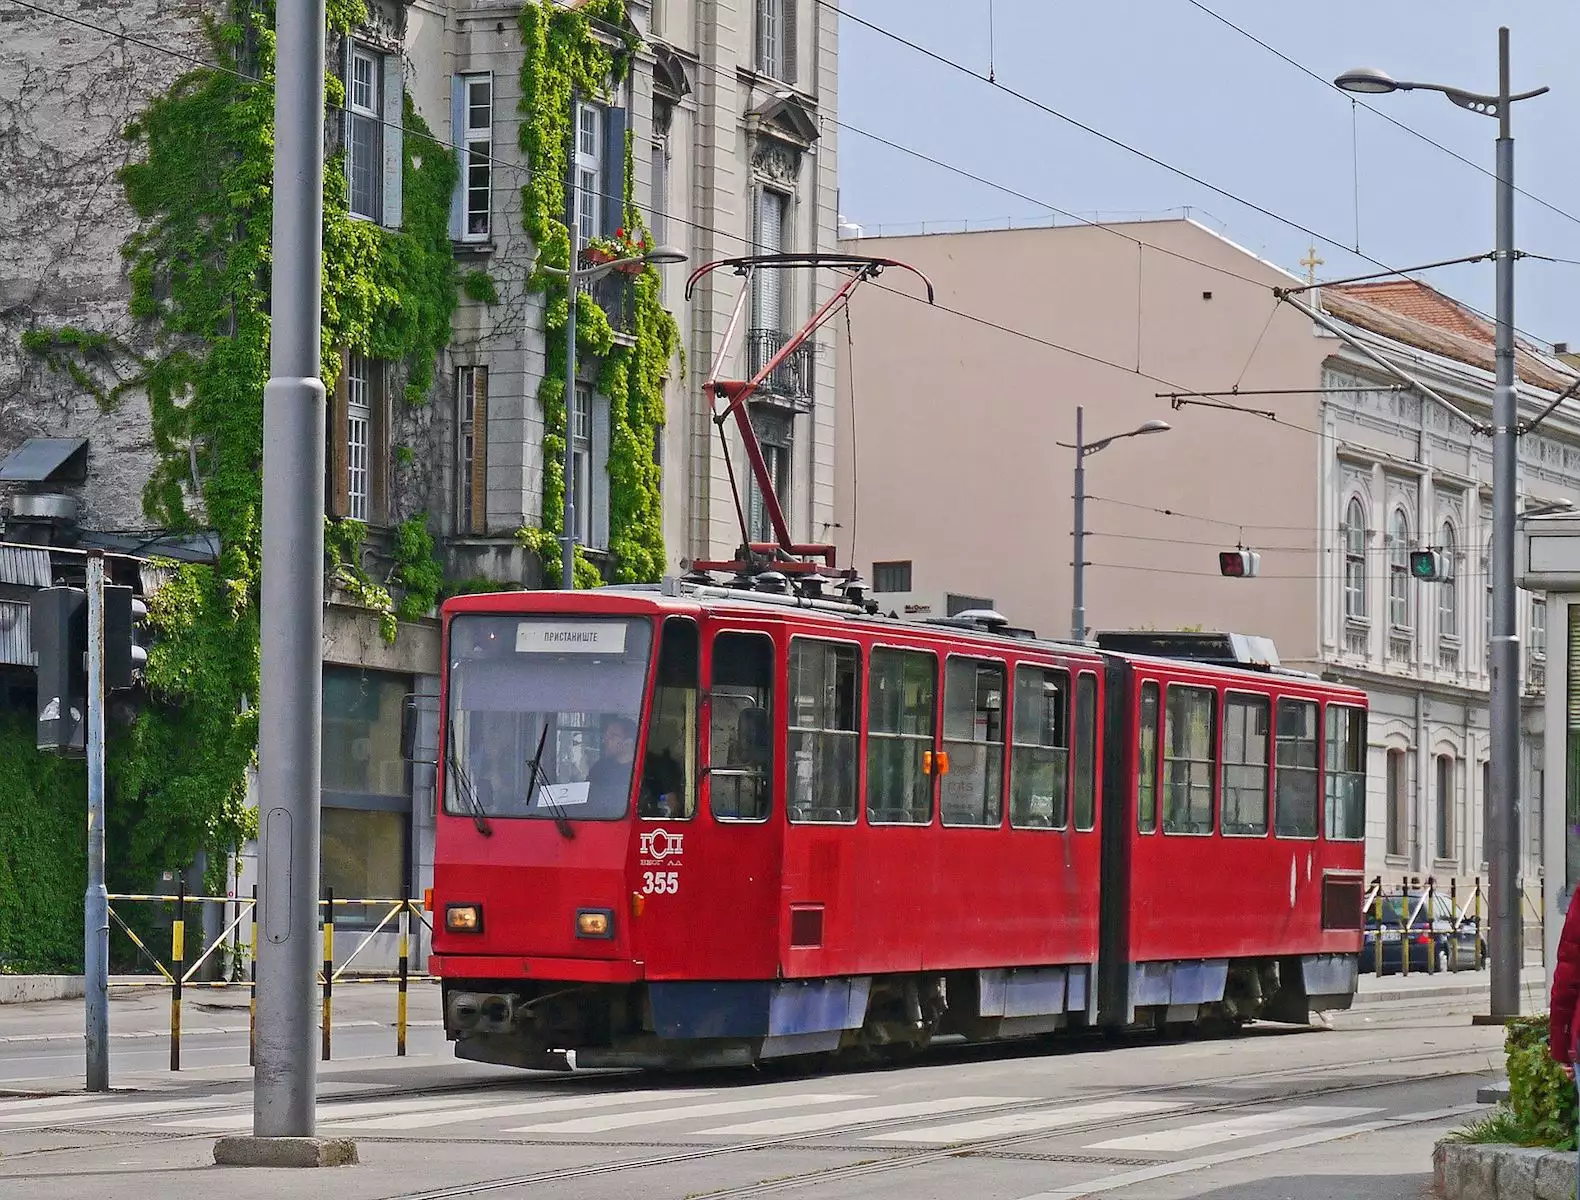 "Dorćol" Trams are Back in Service After 633 Days!